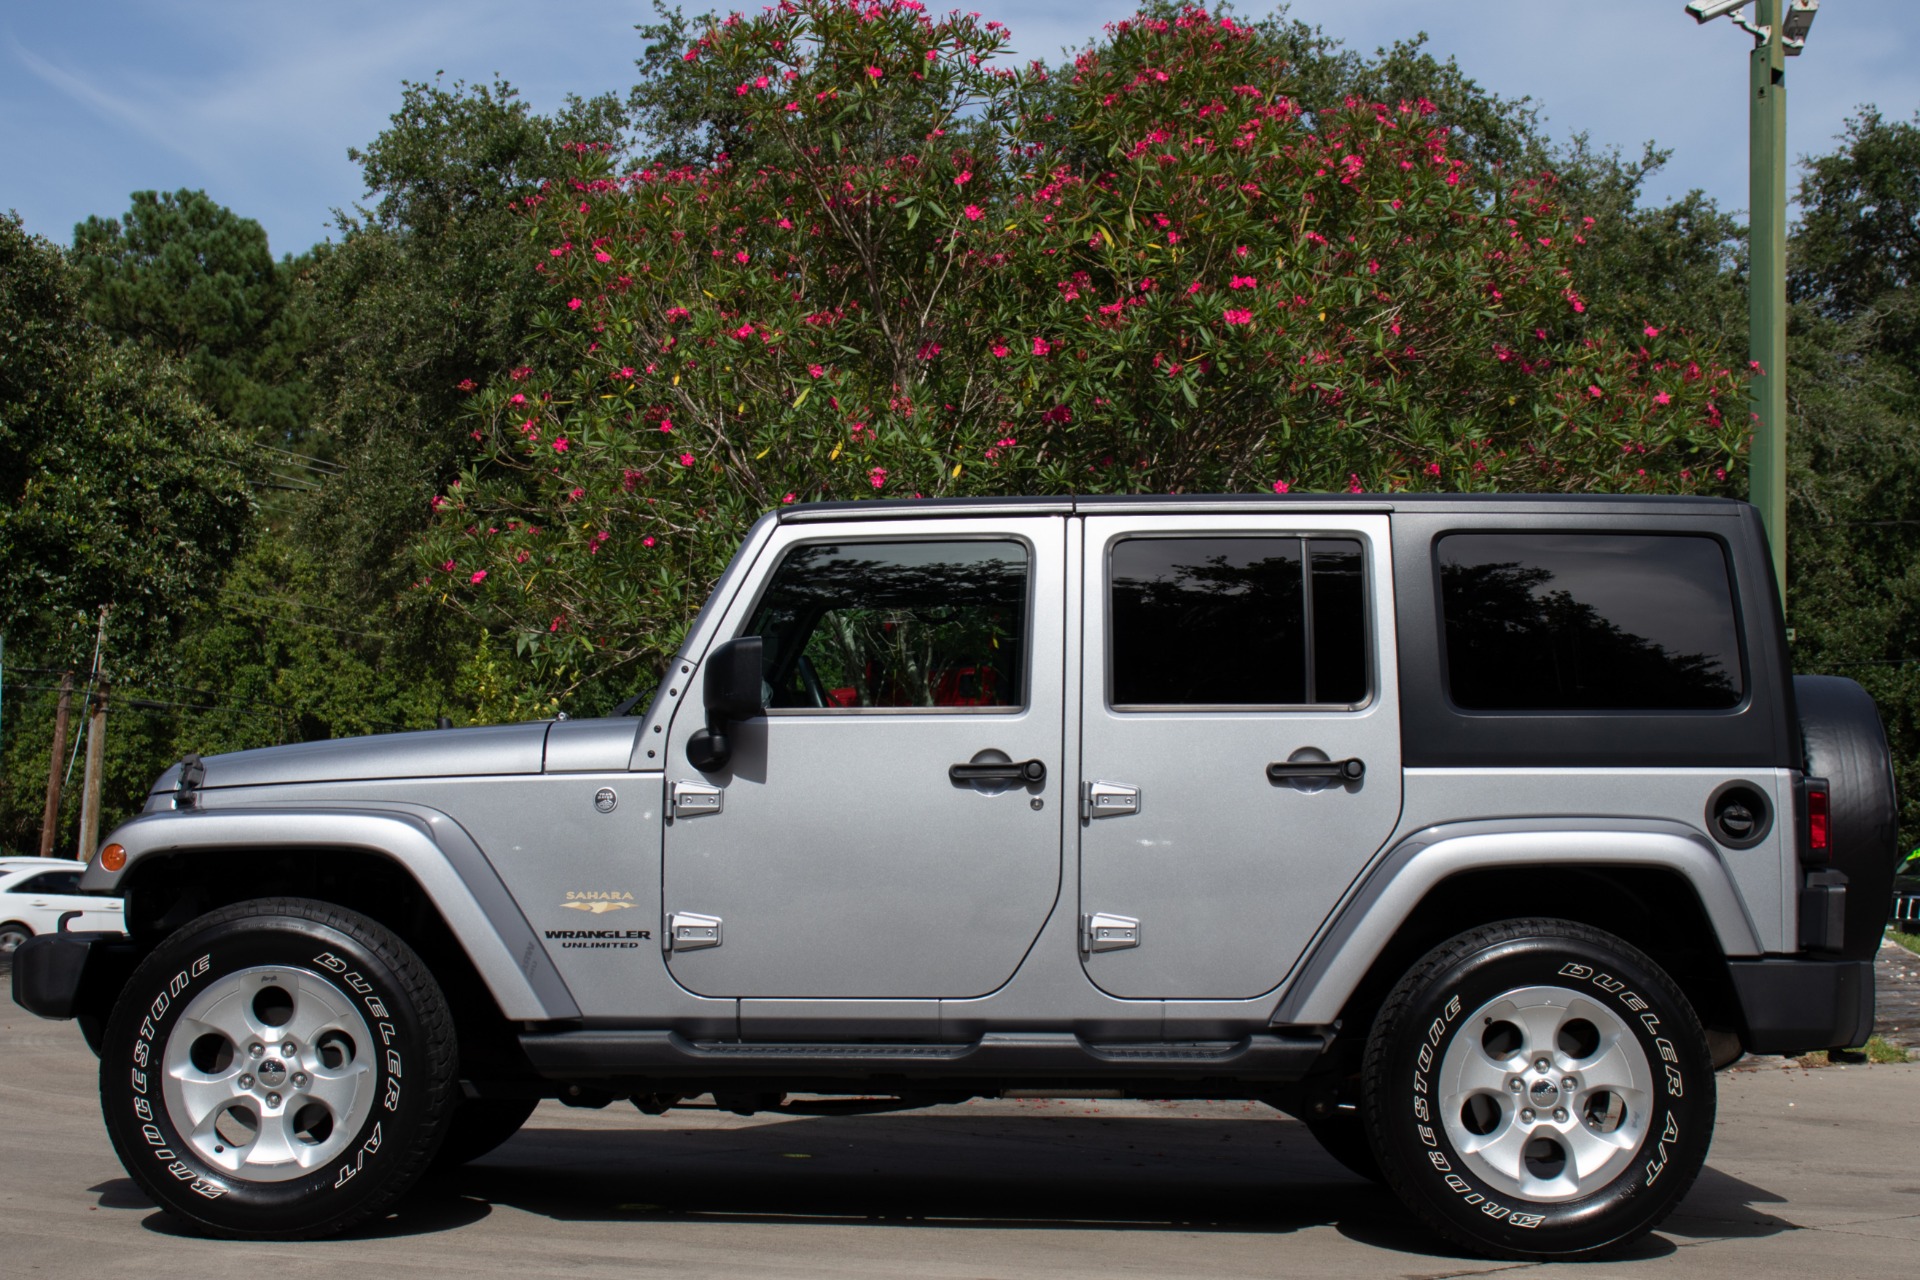 Used 2014 Jeep Wrangler Unlimited Sahara For Sale 26 995